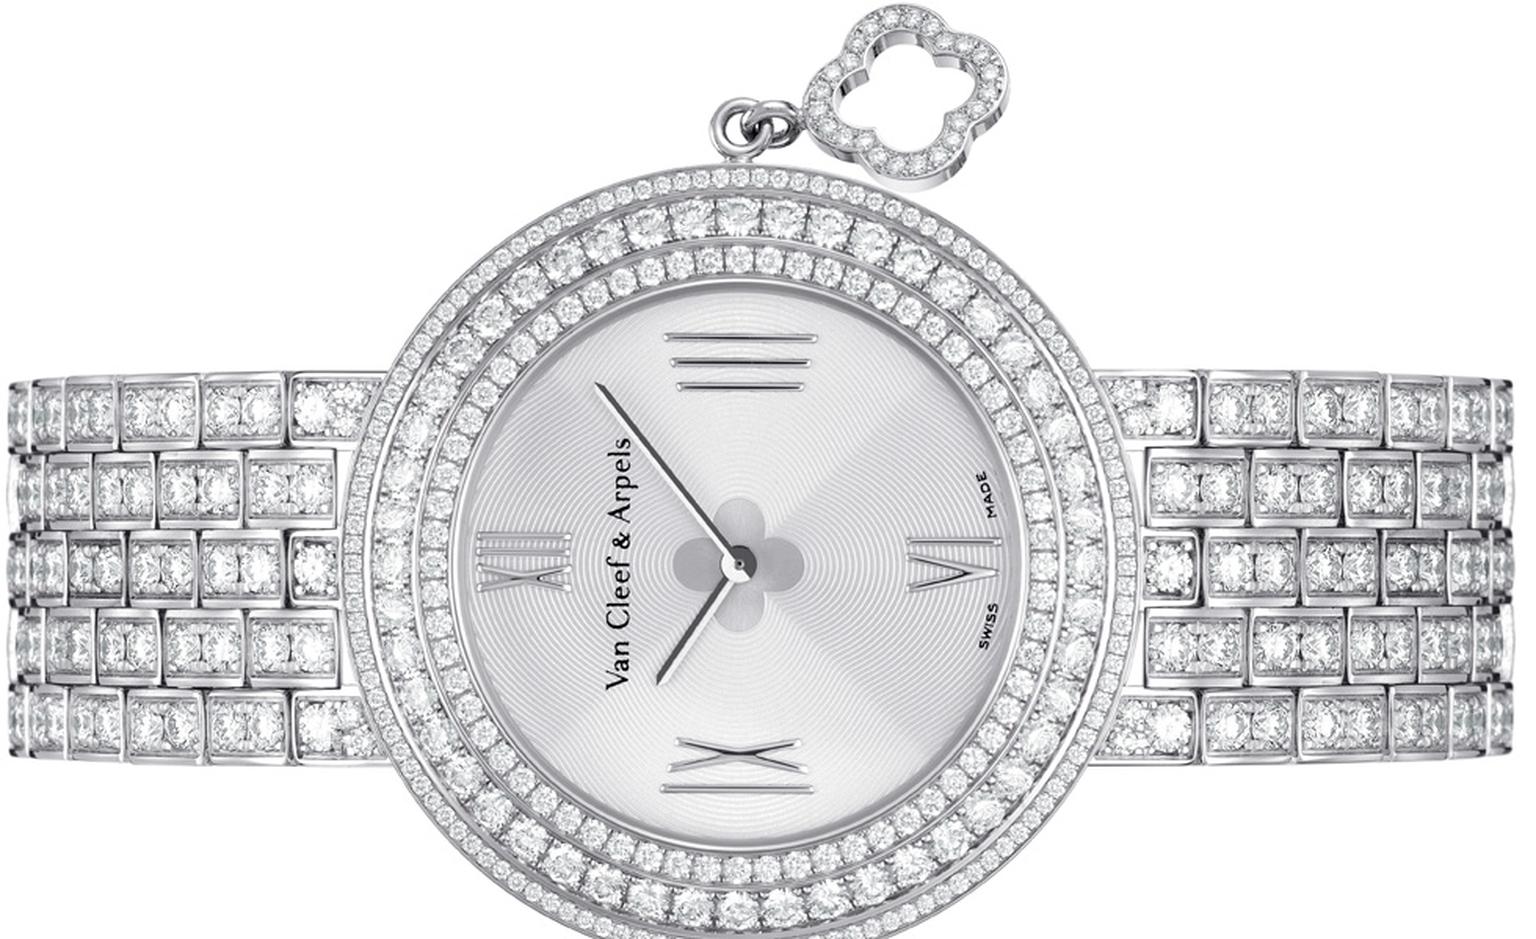 Van Cleef & Arpels Charms watch in white gold with diamond-set bezel and bracelet